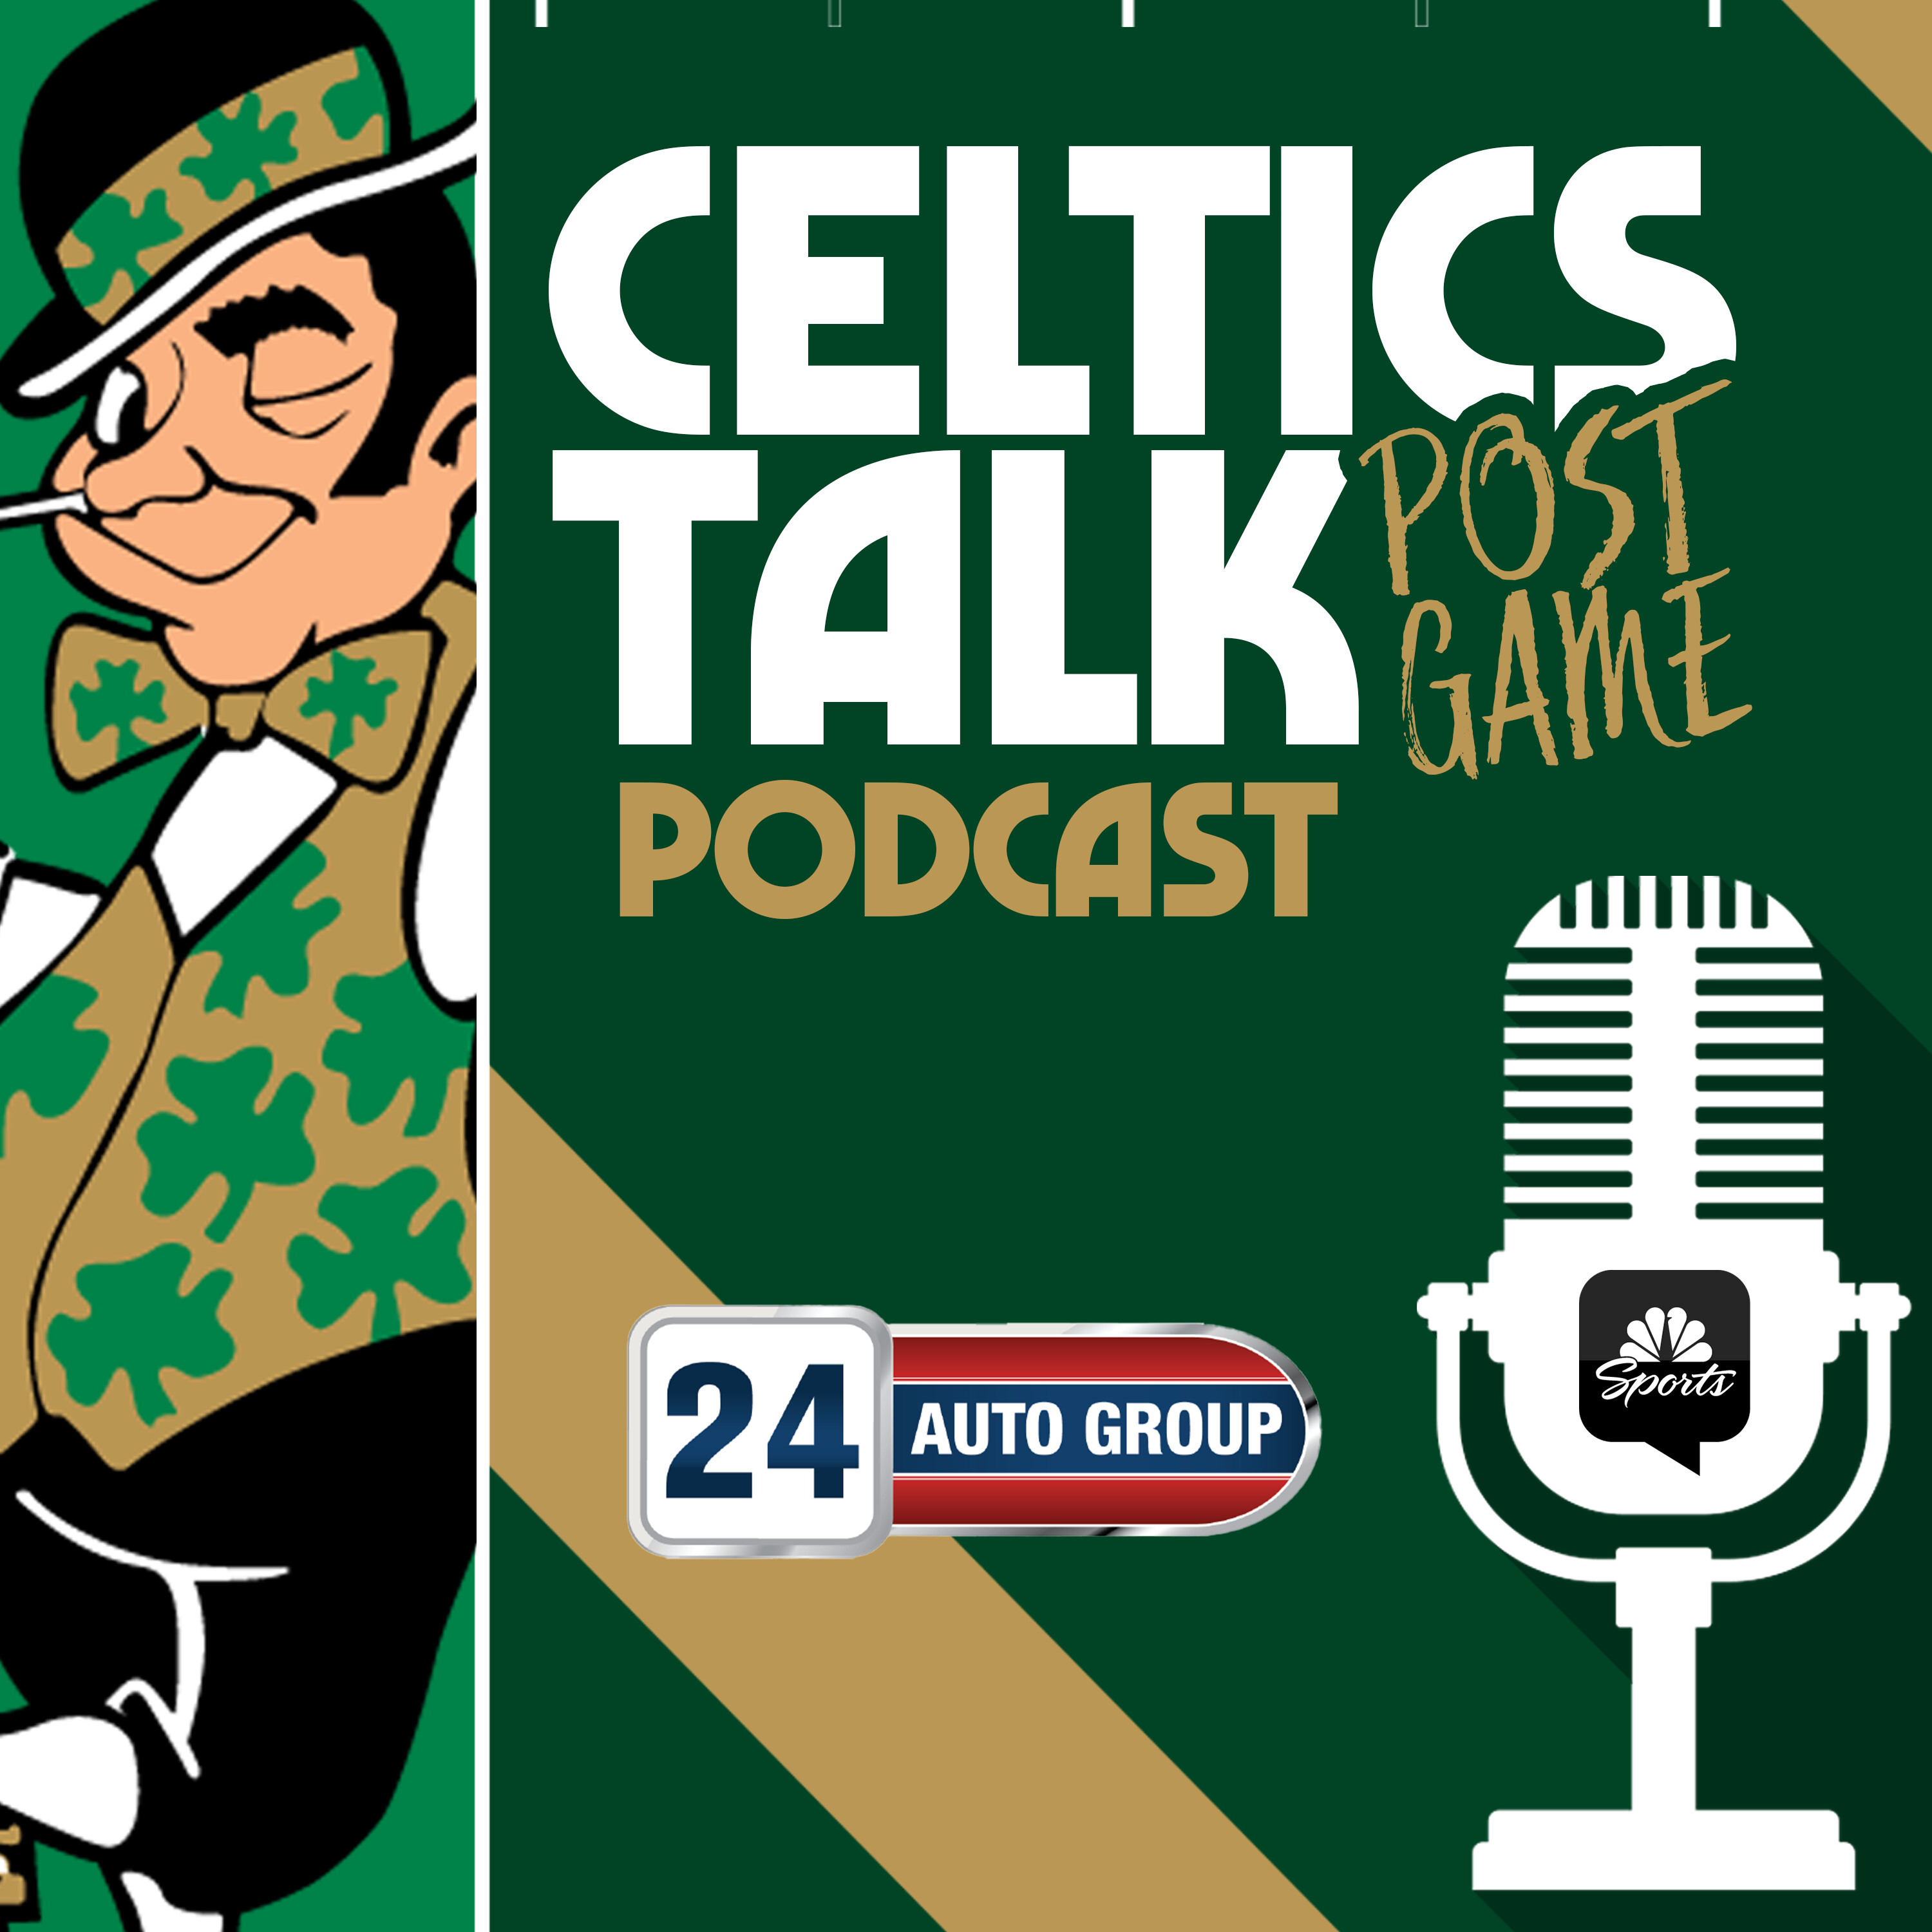 POSTGAME POD: Celtics pull out OT win vs. Lakers in one of the WILDEST games of the year